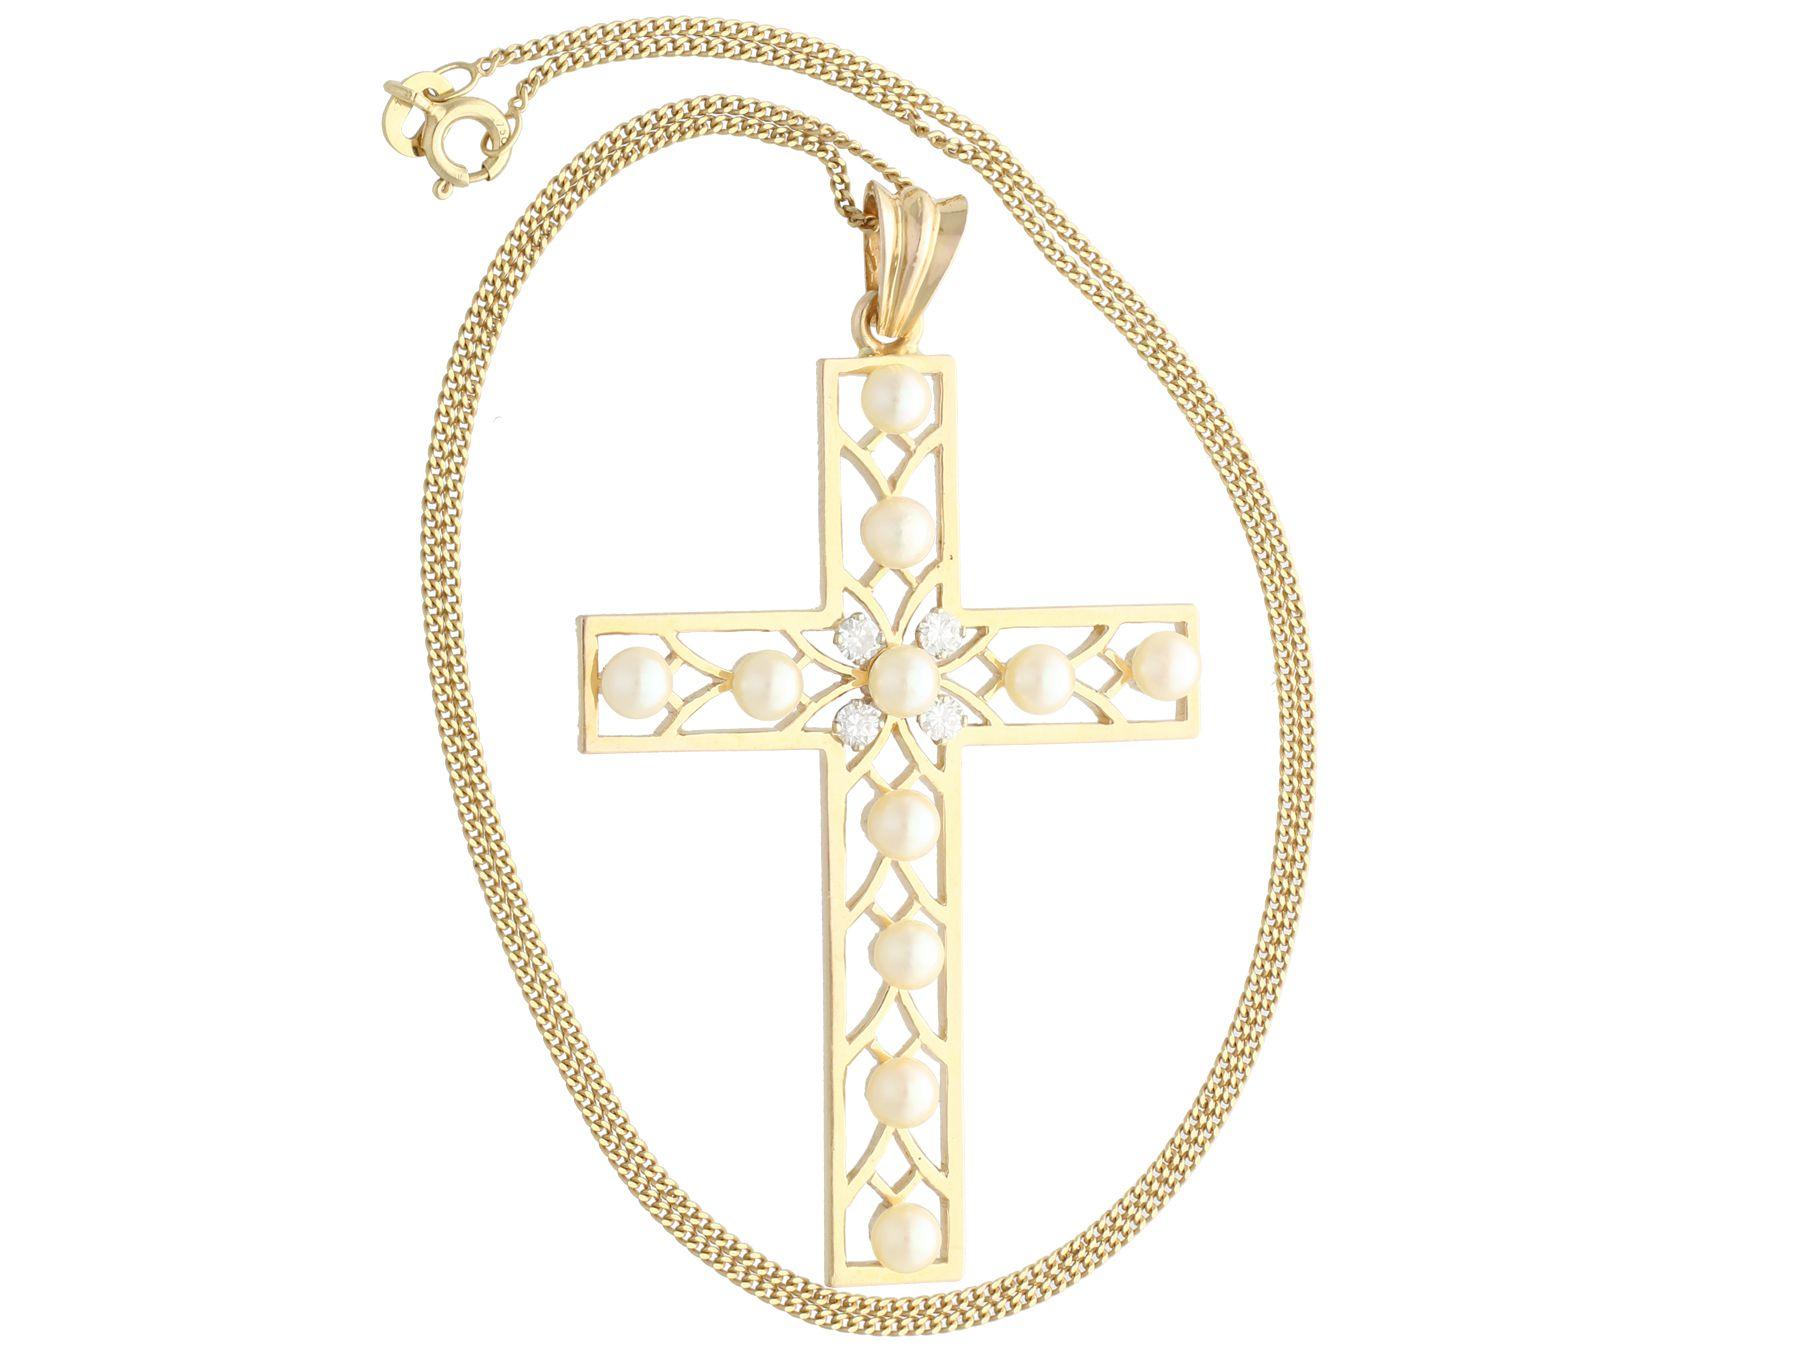 A stunning, fine and impressive antique French seed pearl and 0.20Ct diamond, 18k yellow gold cross pendant; part of our diverse antique jewelry and estate jewelry collections.

This stunning antique pendant has been crafted in 18k yellow gold.

The